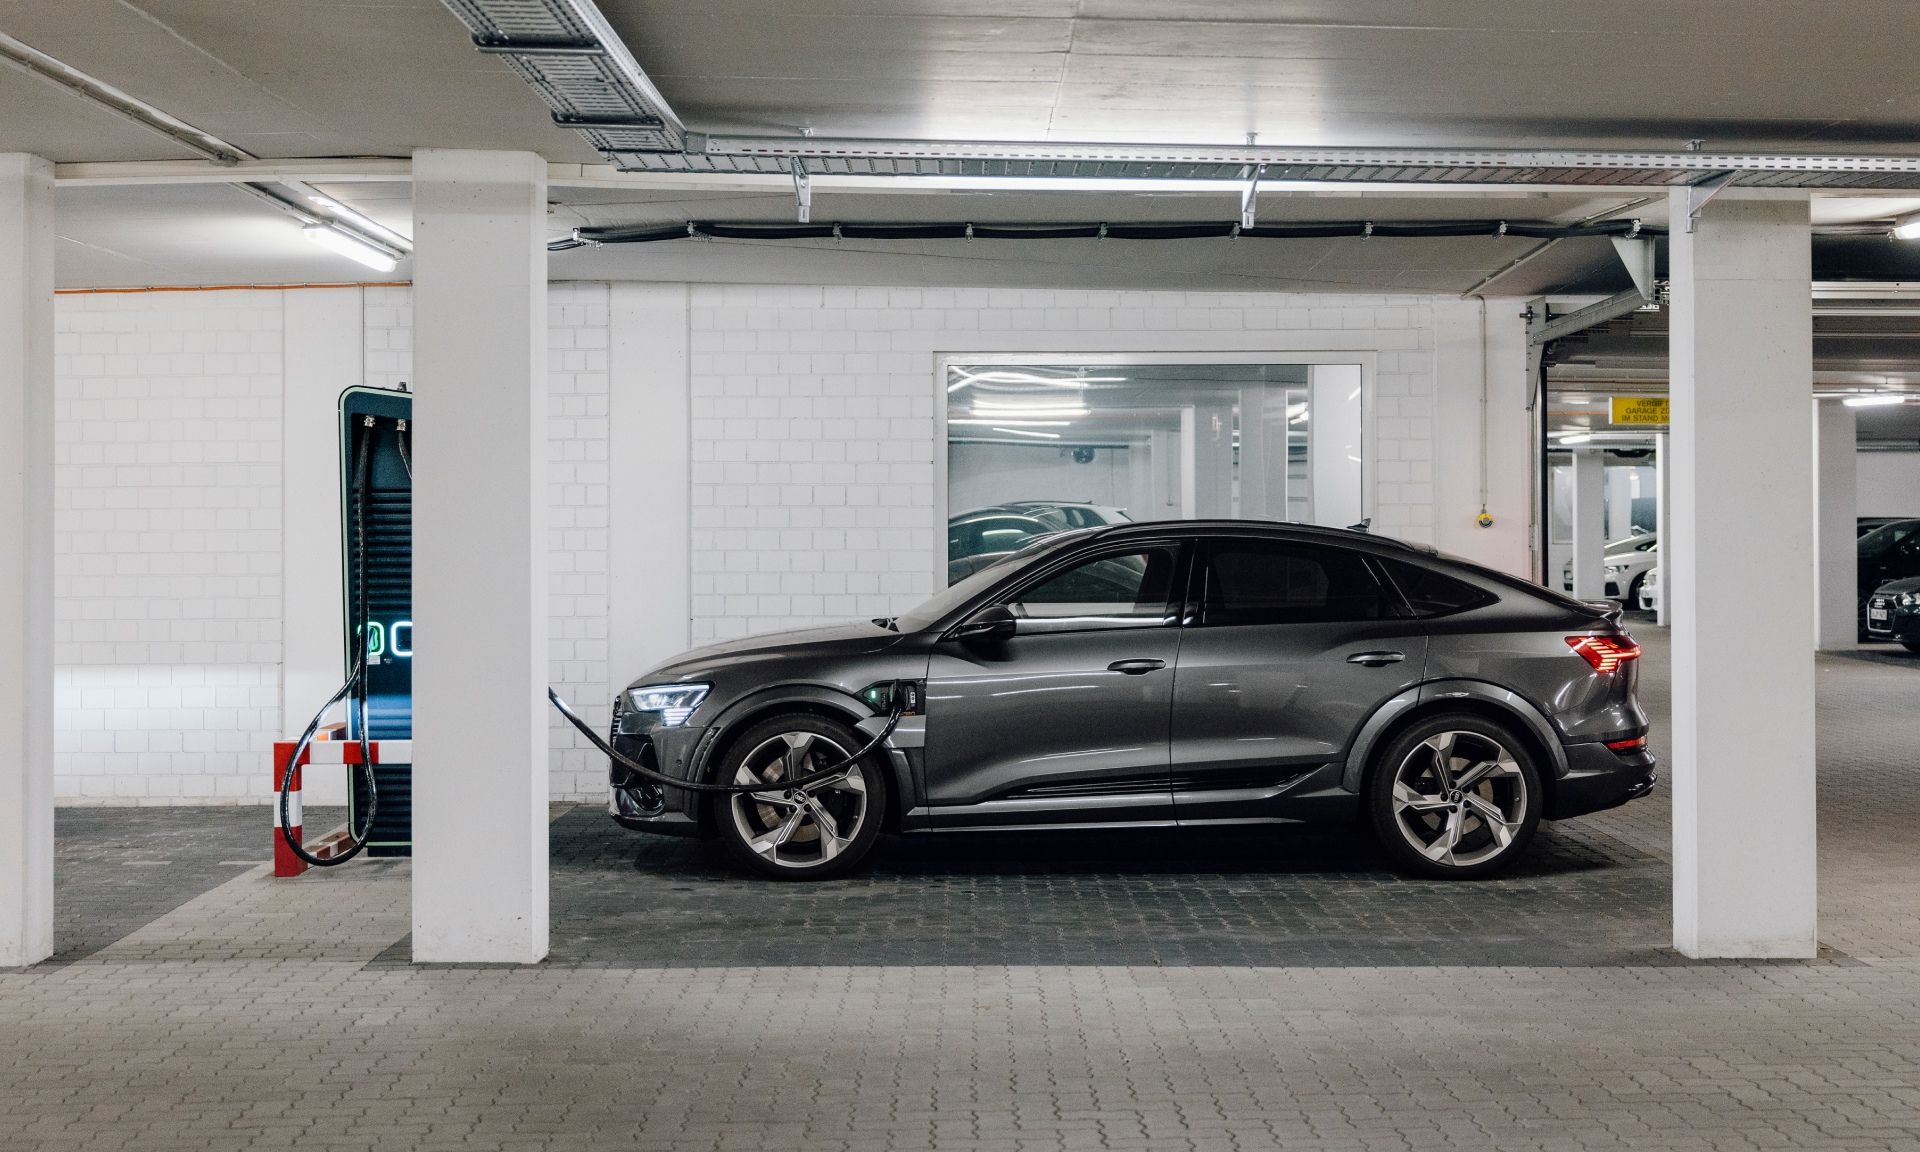 The Audi e-tron S Sportback charges in the underground car park.